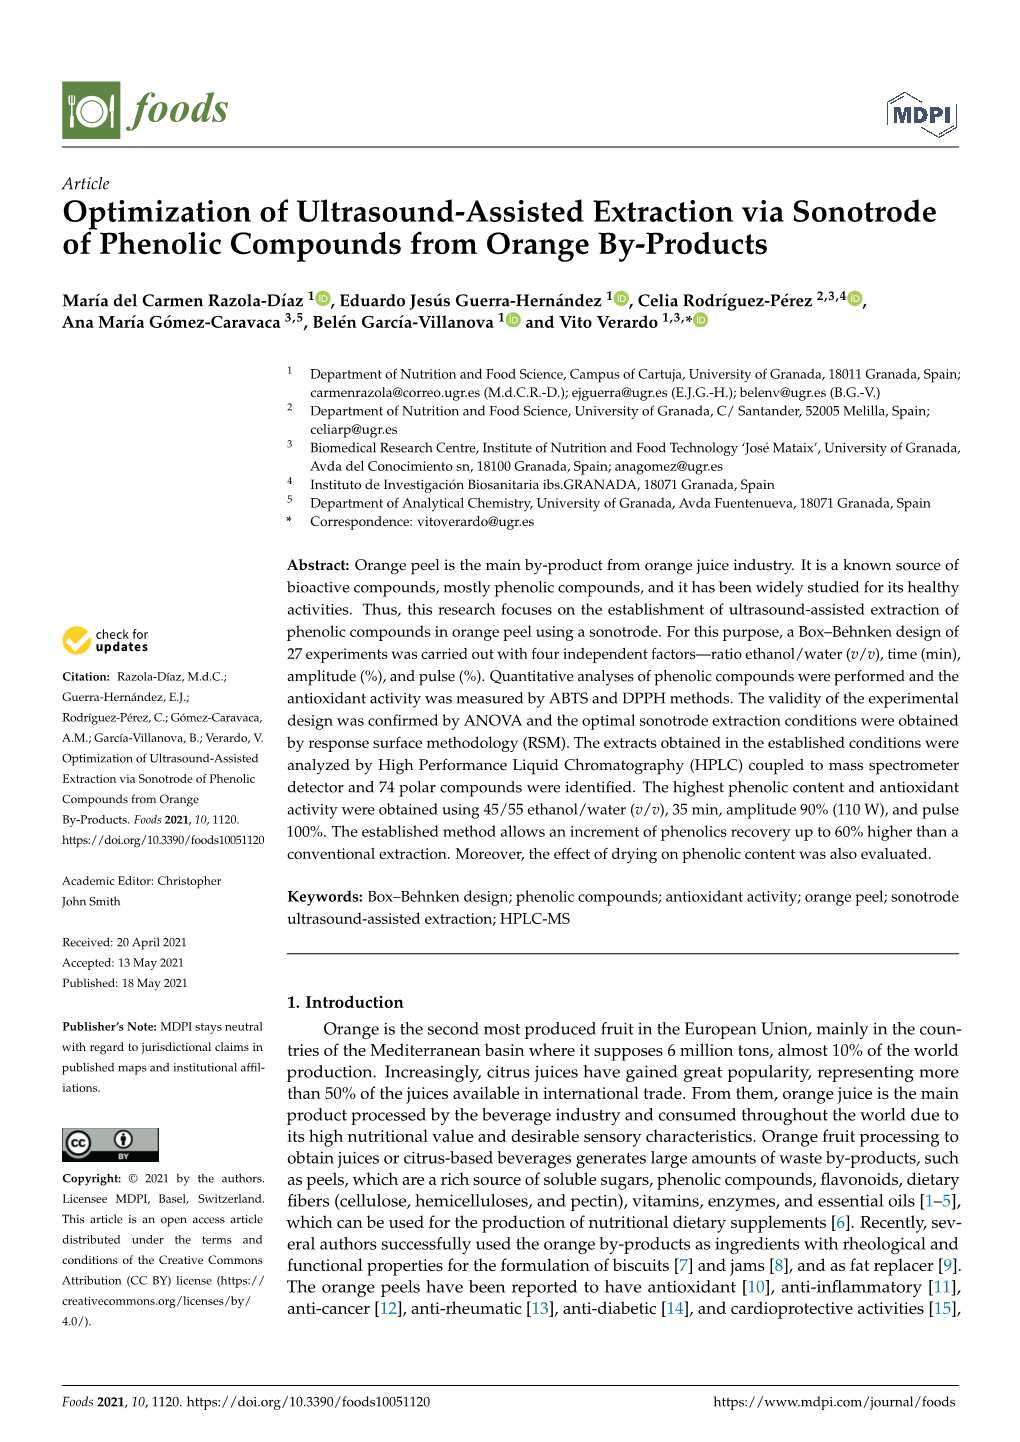 Optimization of Ultrasound-Assisted Extraction Via Sonotrode of Phenolic Compounds from Orange By-Products